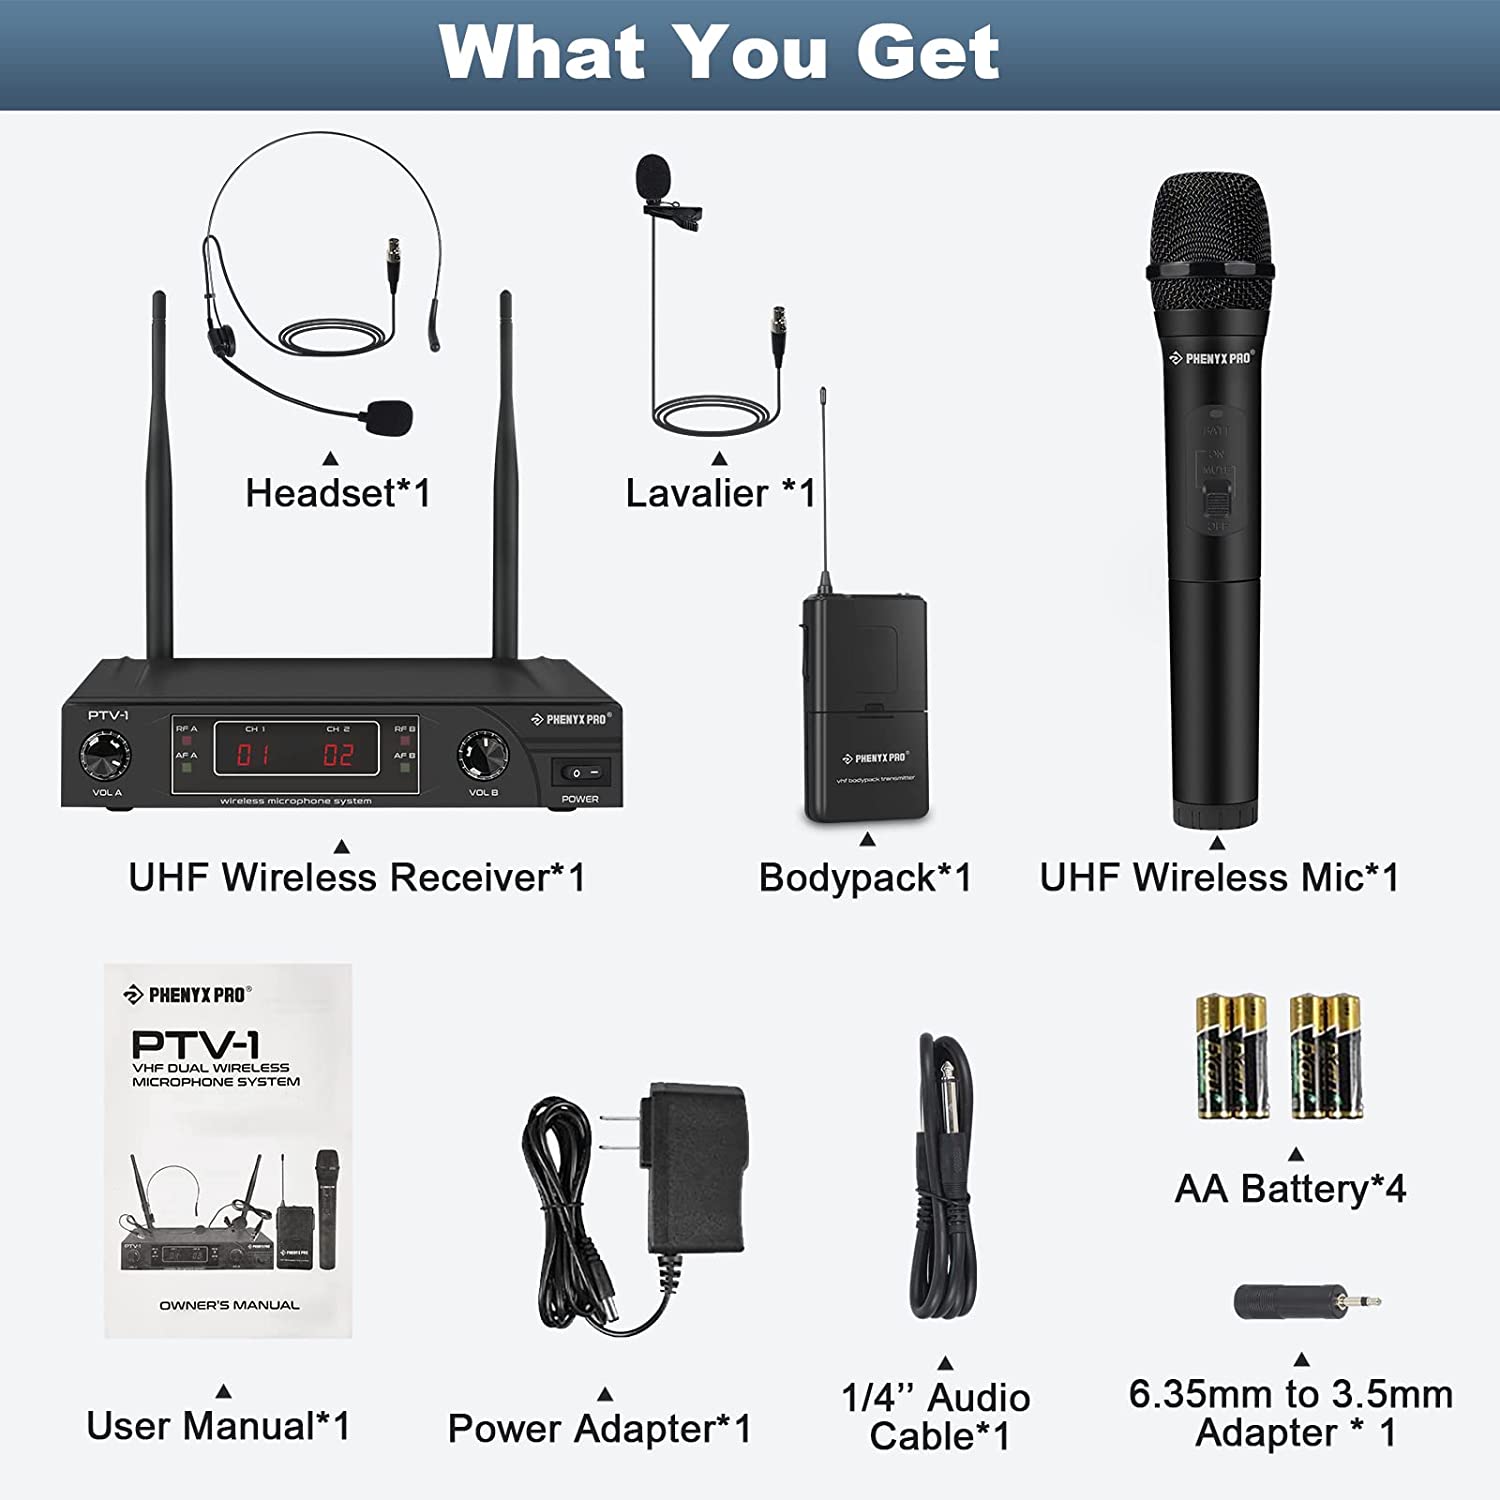 Phenyx Pro PTV-1B Dual VHF Wireless Microphone System, come with handheld mic, headset/lapel mic and bodypack